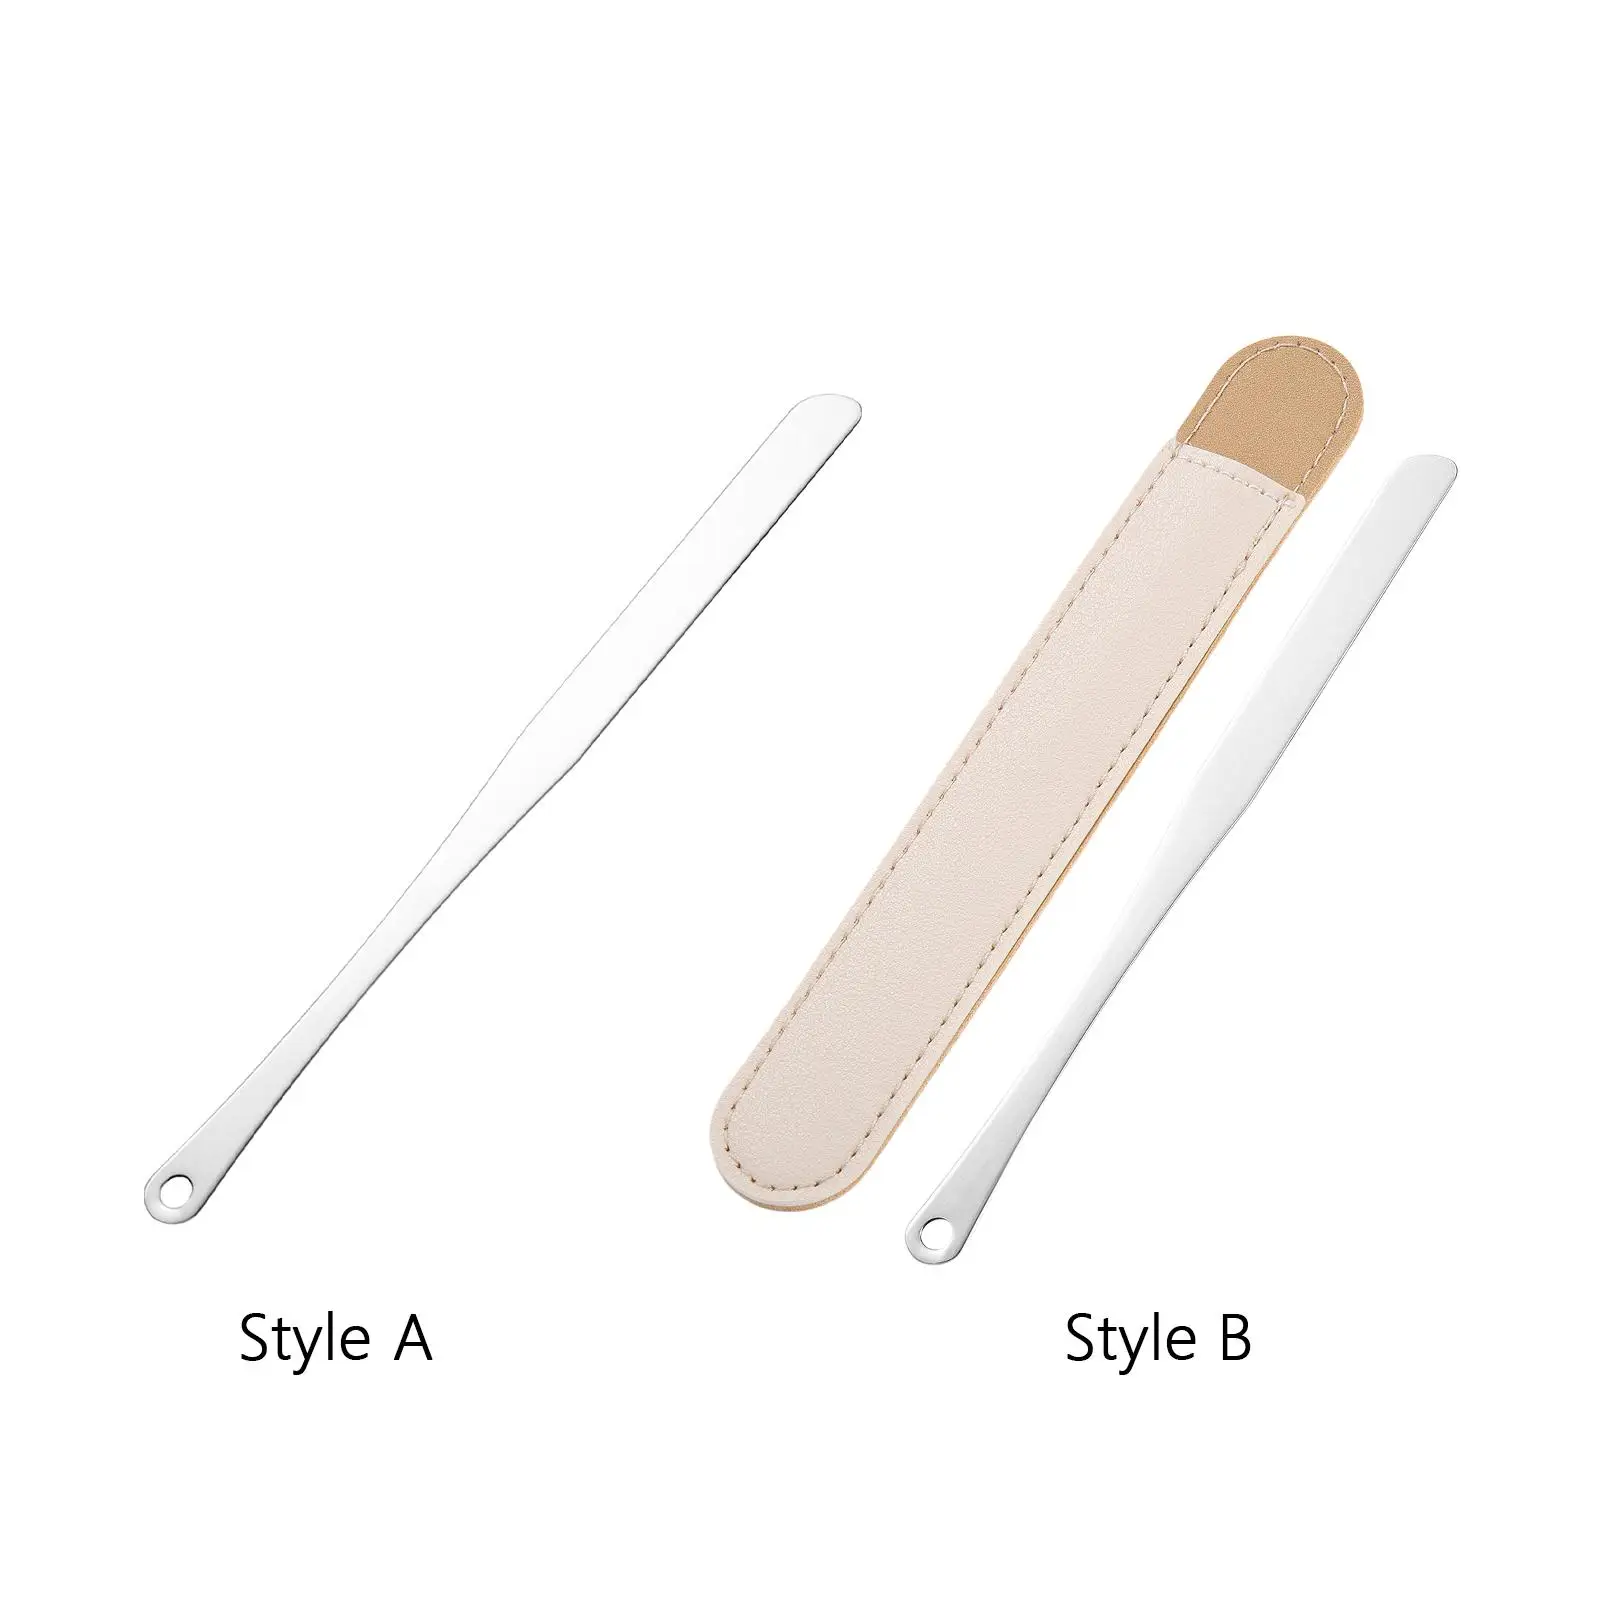 Makeup Spatulas Nail Art Tool Stainless Steel Accessories Cosmetic Mixing Bar Paddle Rod for Foundations Perfect Gifts Beginner